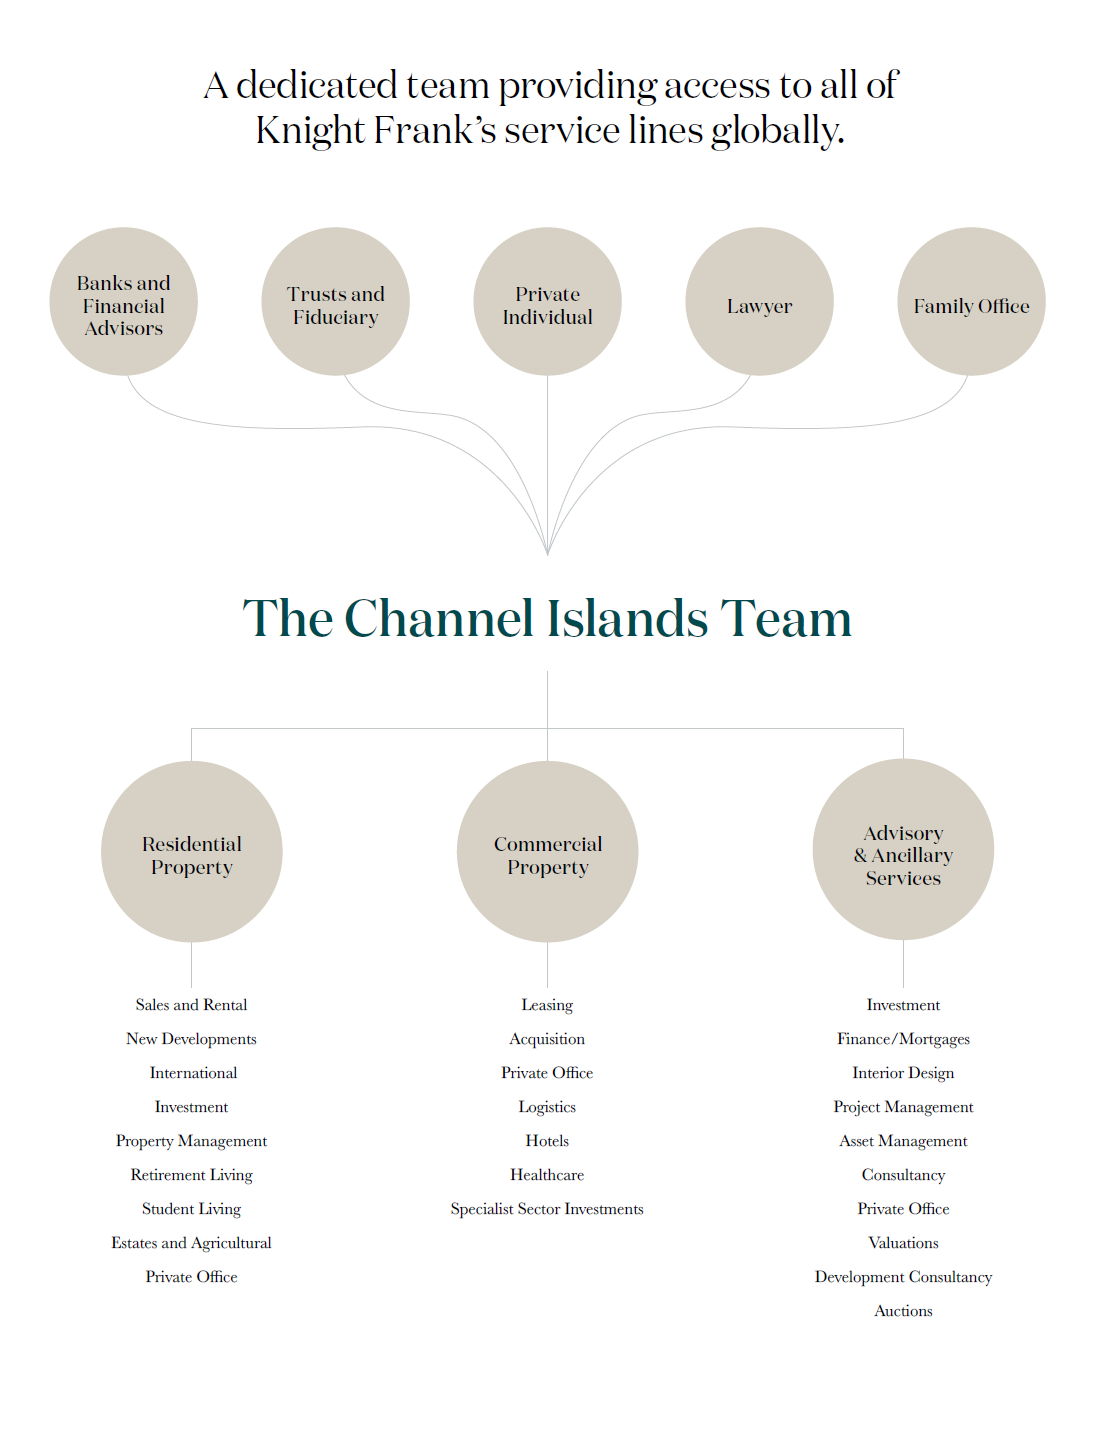 channel-islands-team-grahpic